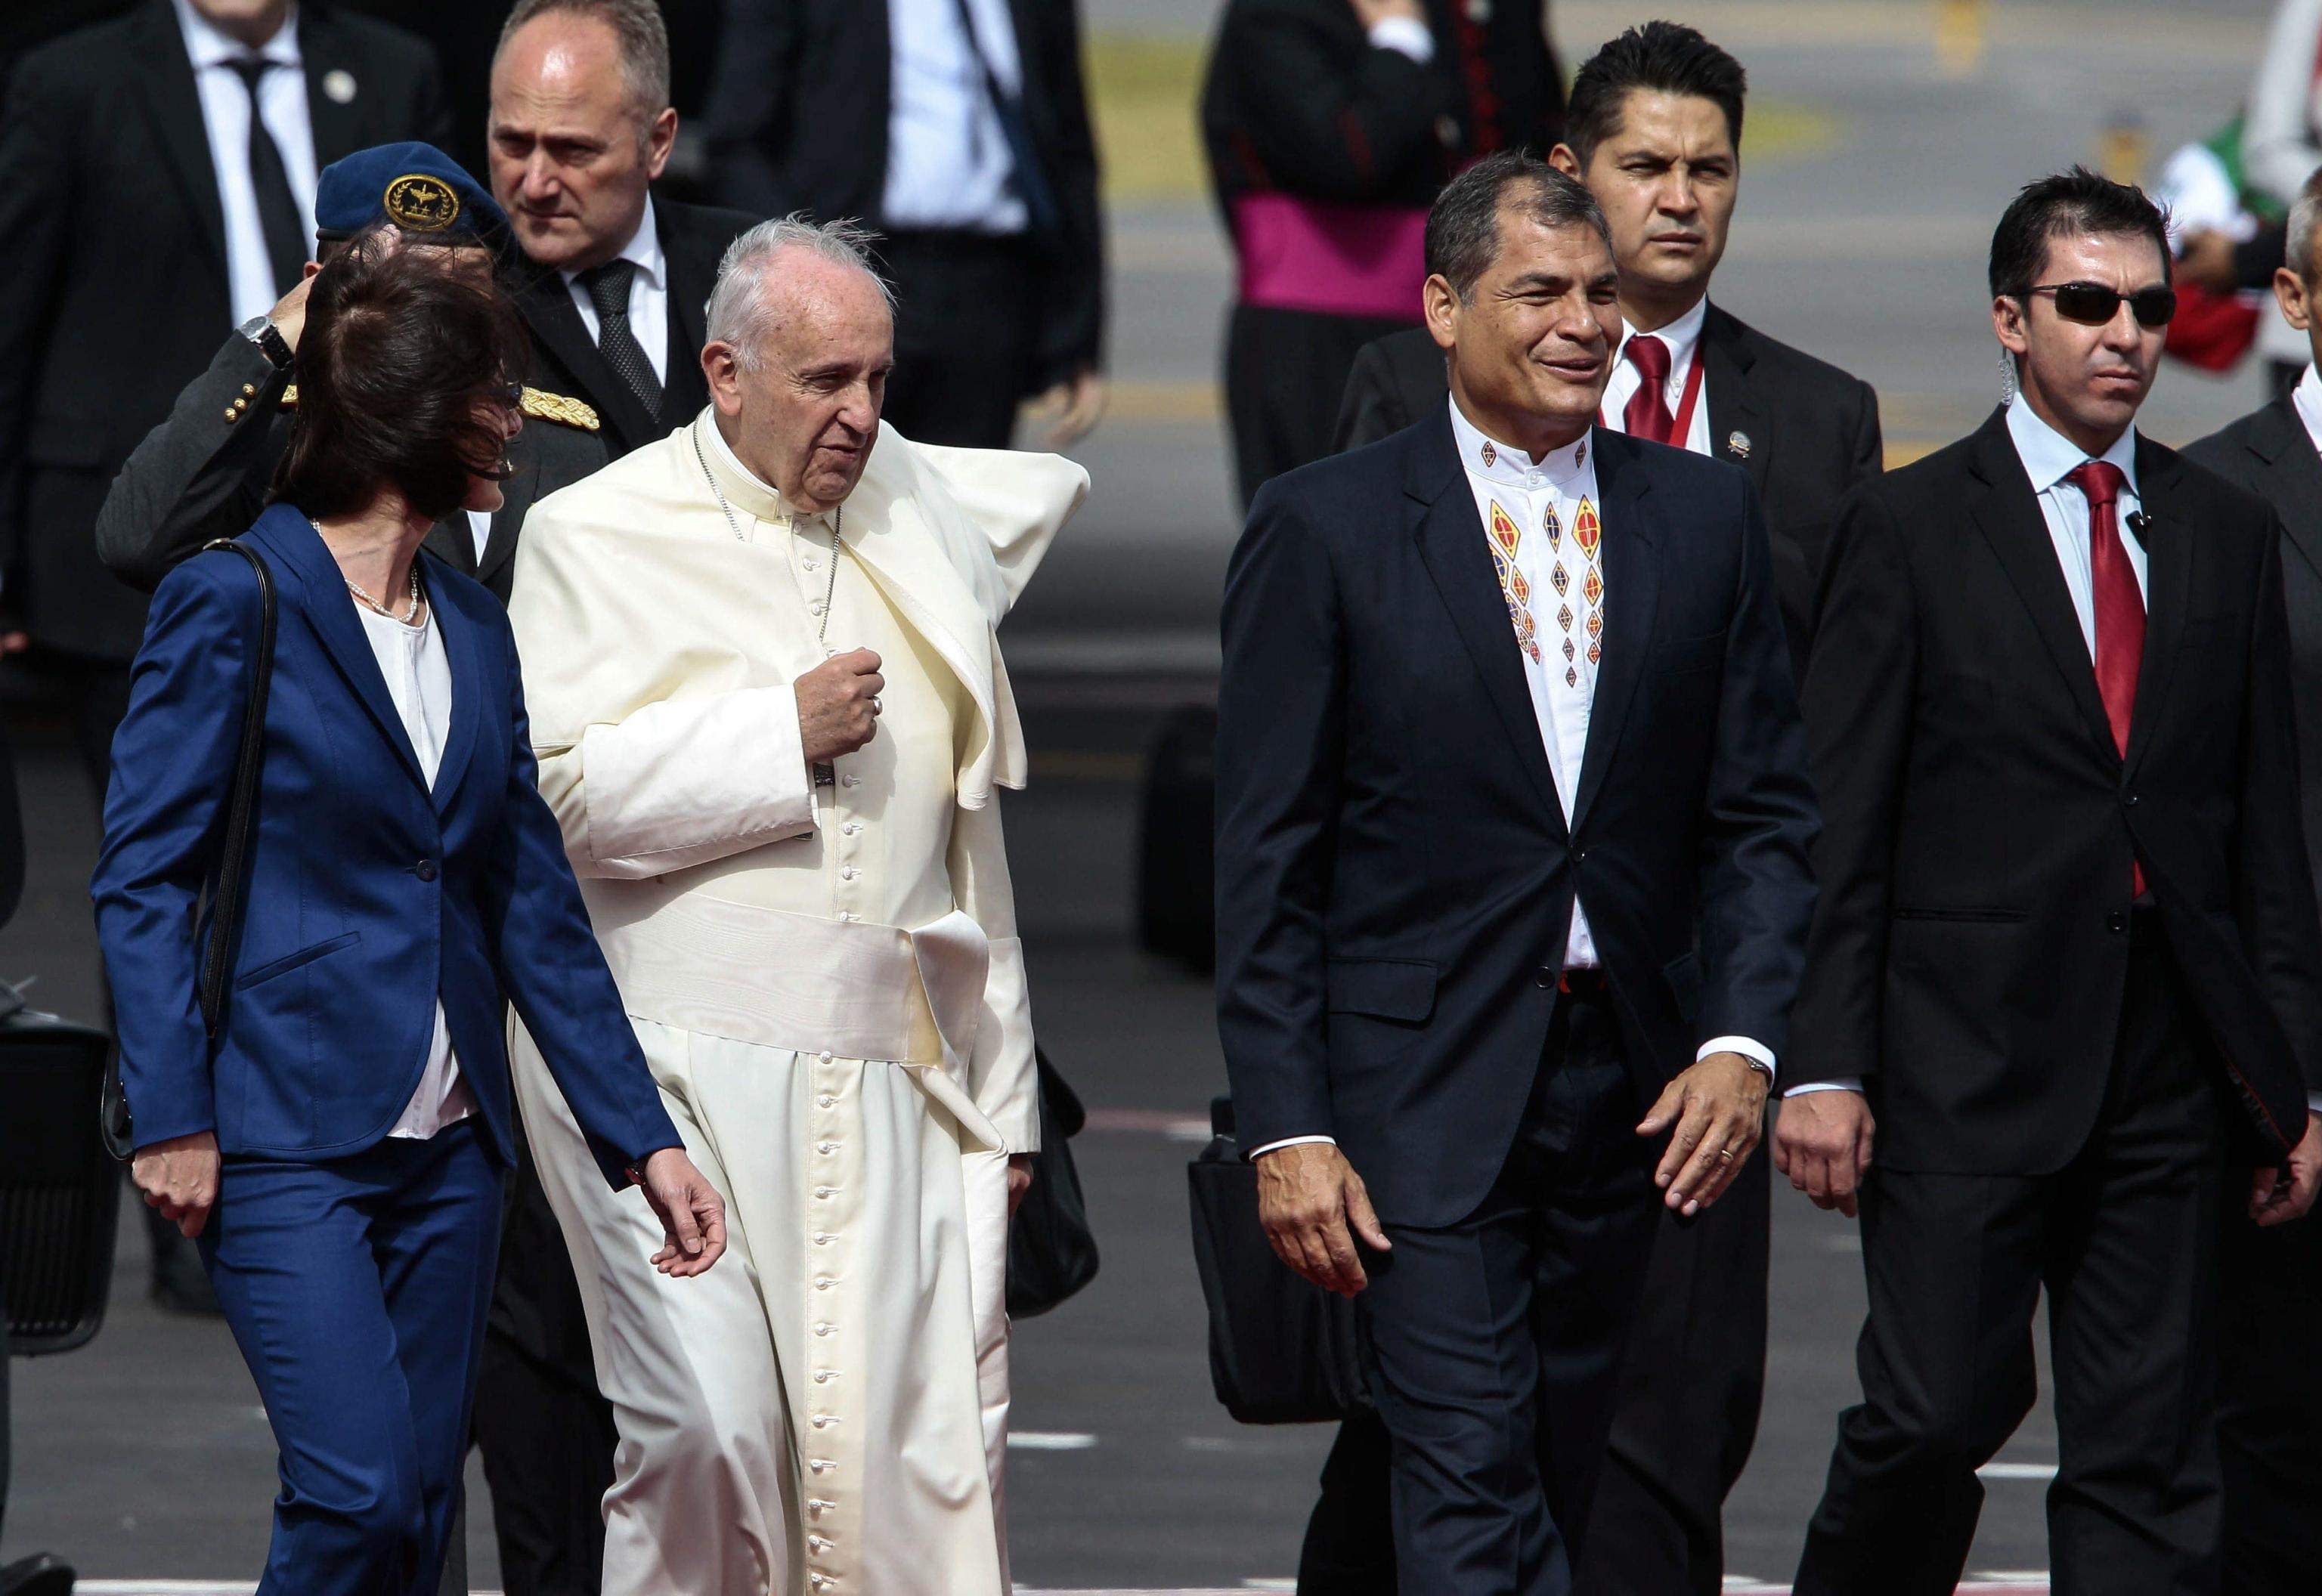 Pope Francis next to Ecuador's President Rafael Correa at his arrival at the International Airport of Quito